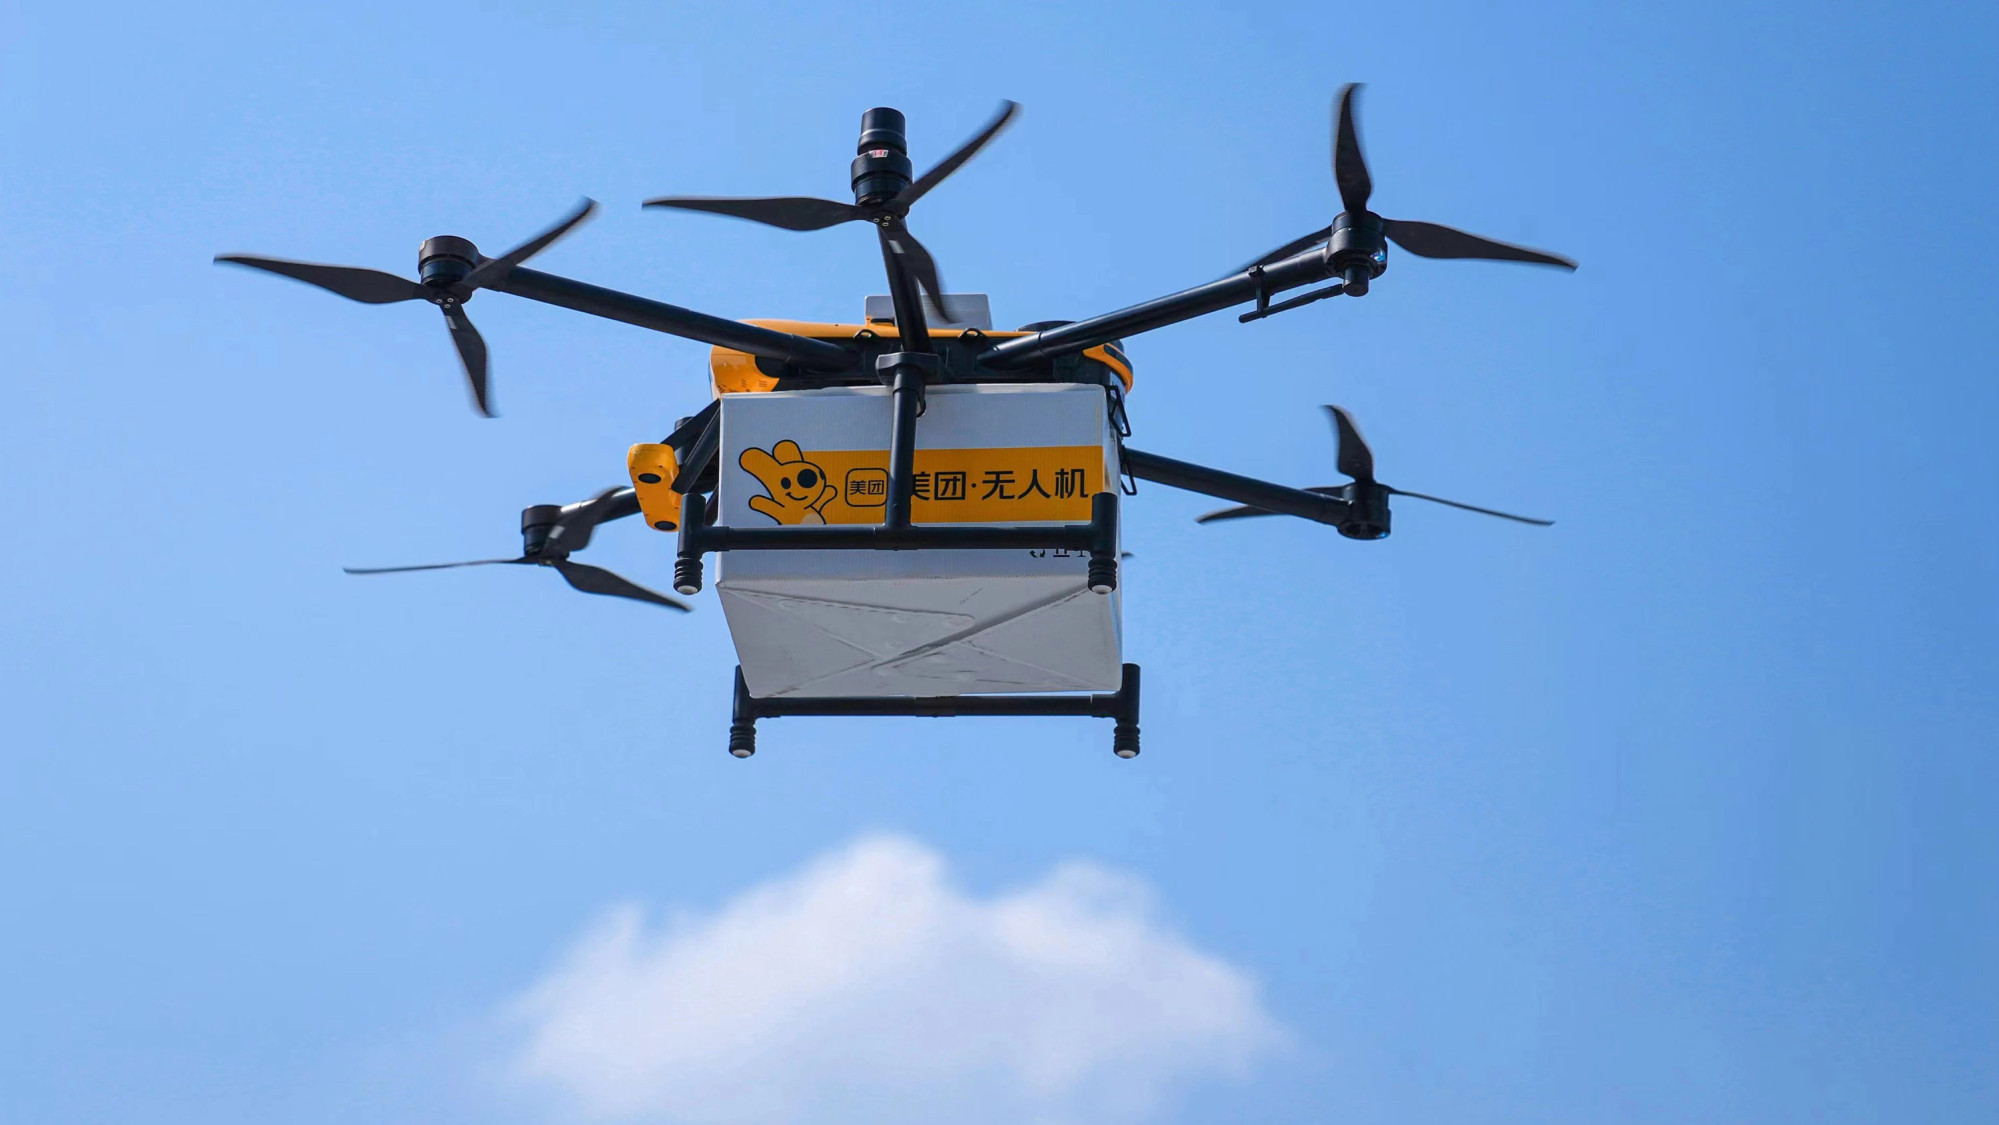 Shenzhen has been chosen by Meituan as the centre of its drone delivery services because the city’s legislation is particularly accommodating of the technology. Photo: Meituan